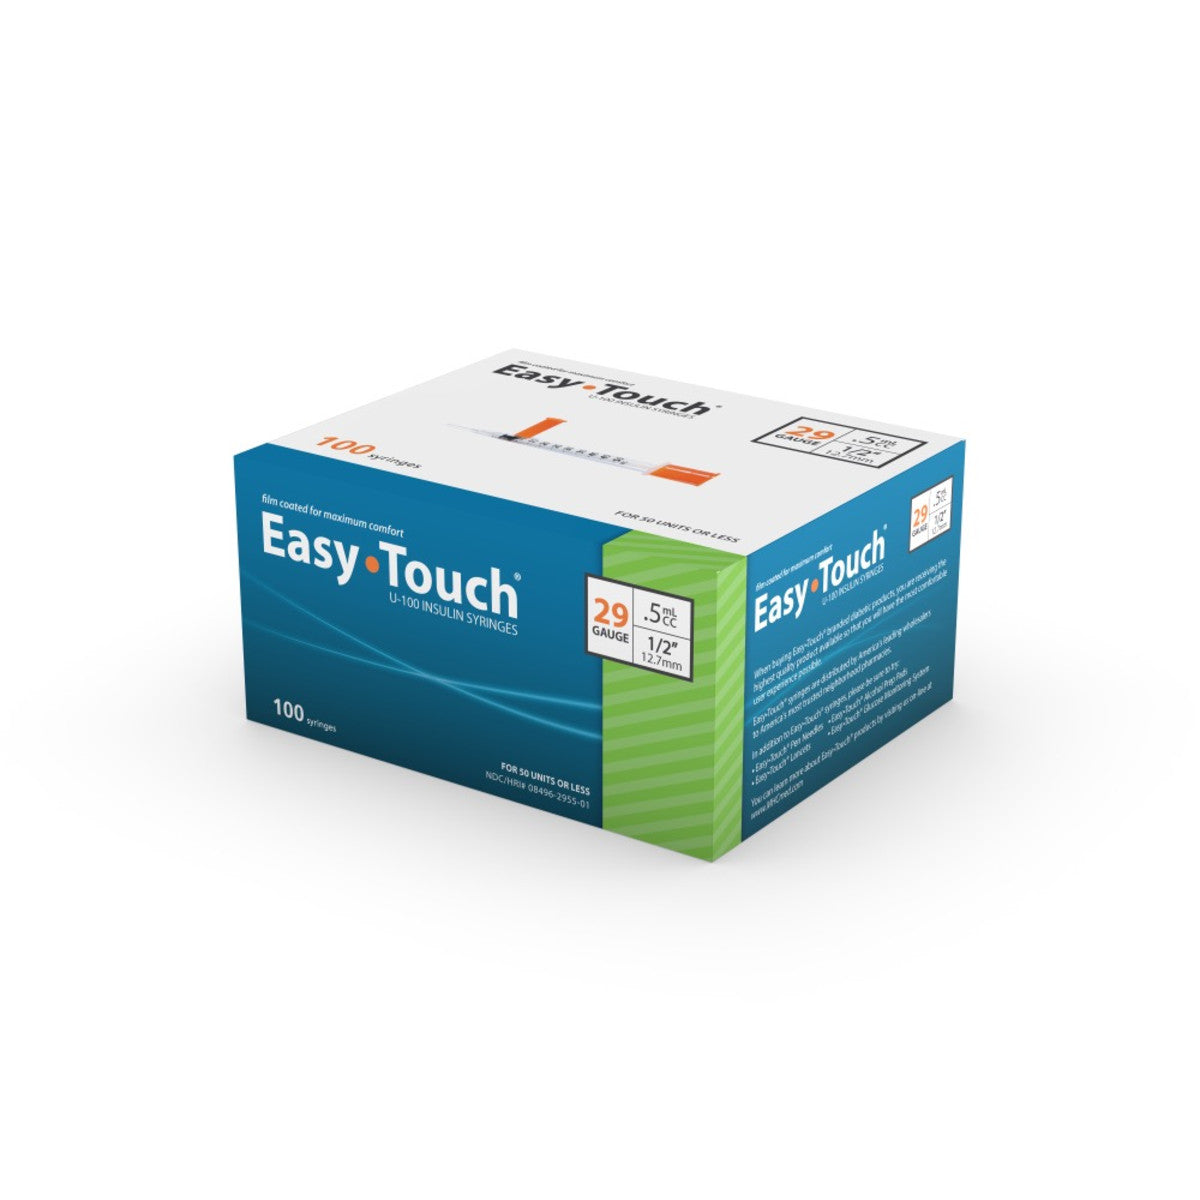 Easy Touch Insulin Syringe, 29G .5cc 1/2-Inch (12.7mm), 829555, Box of 100